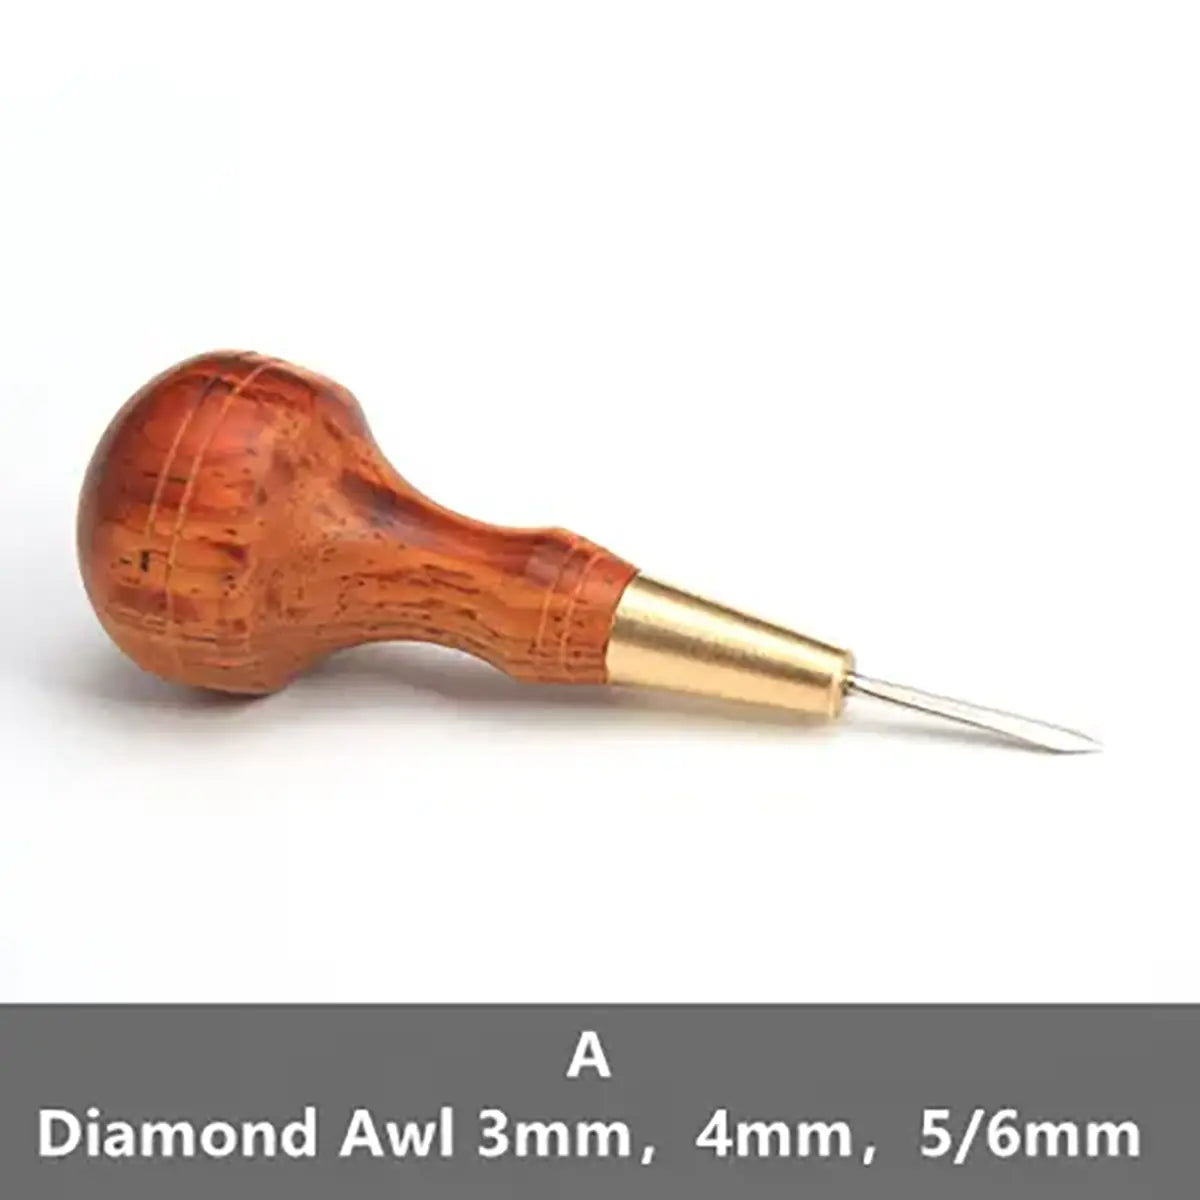 Gourd Shaped Diamond and Point Awls